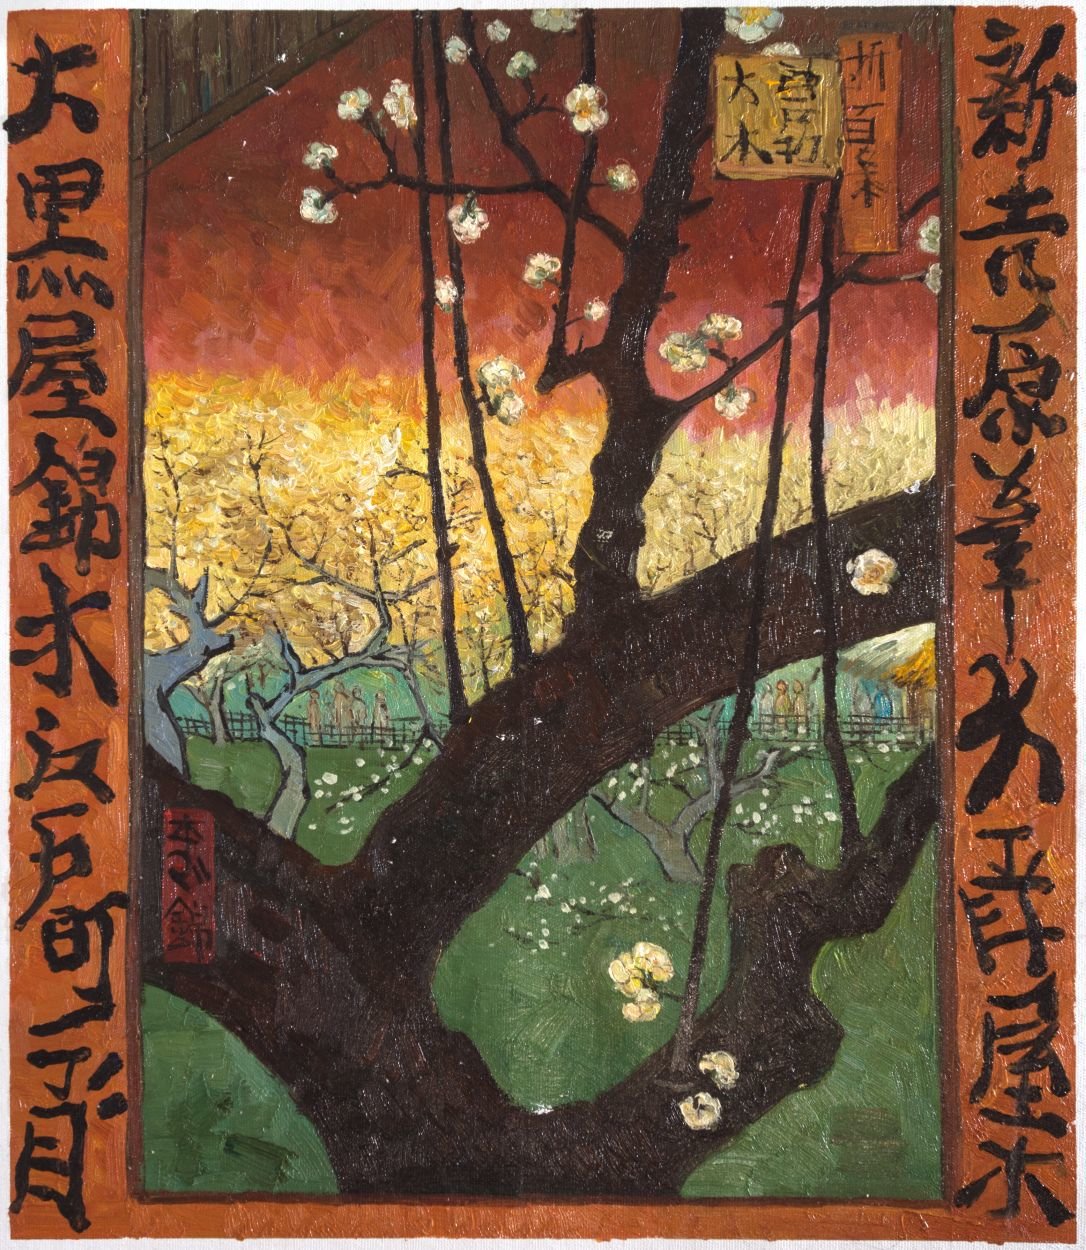 Van Gogh and Japanese influence